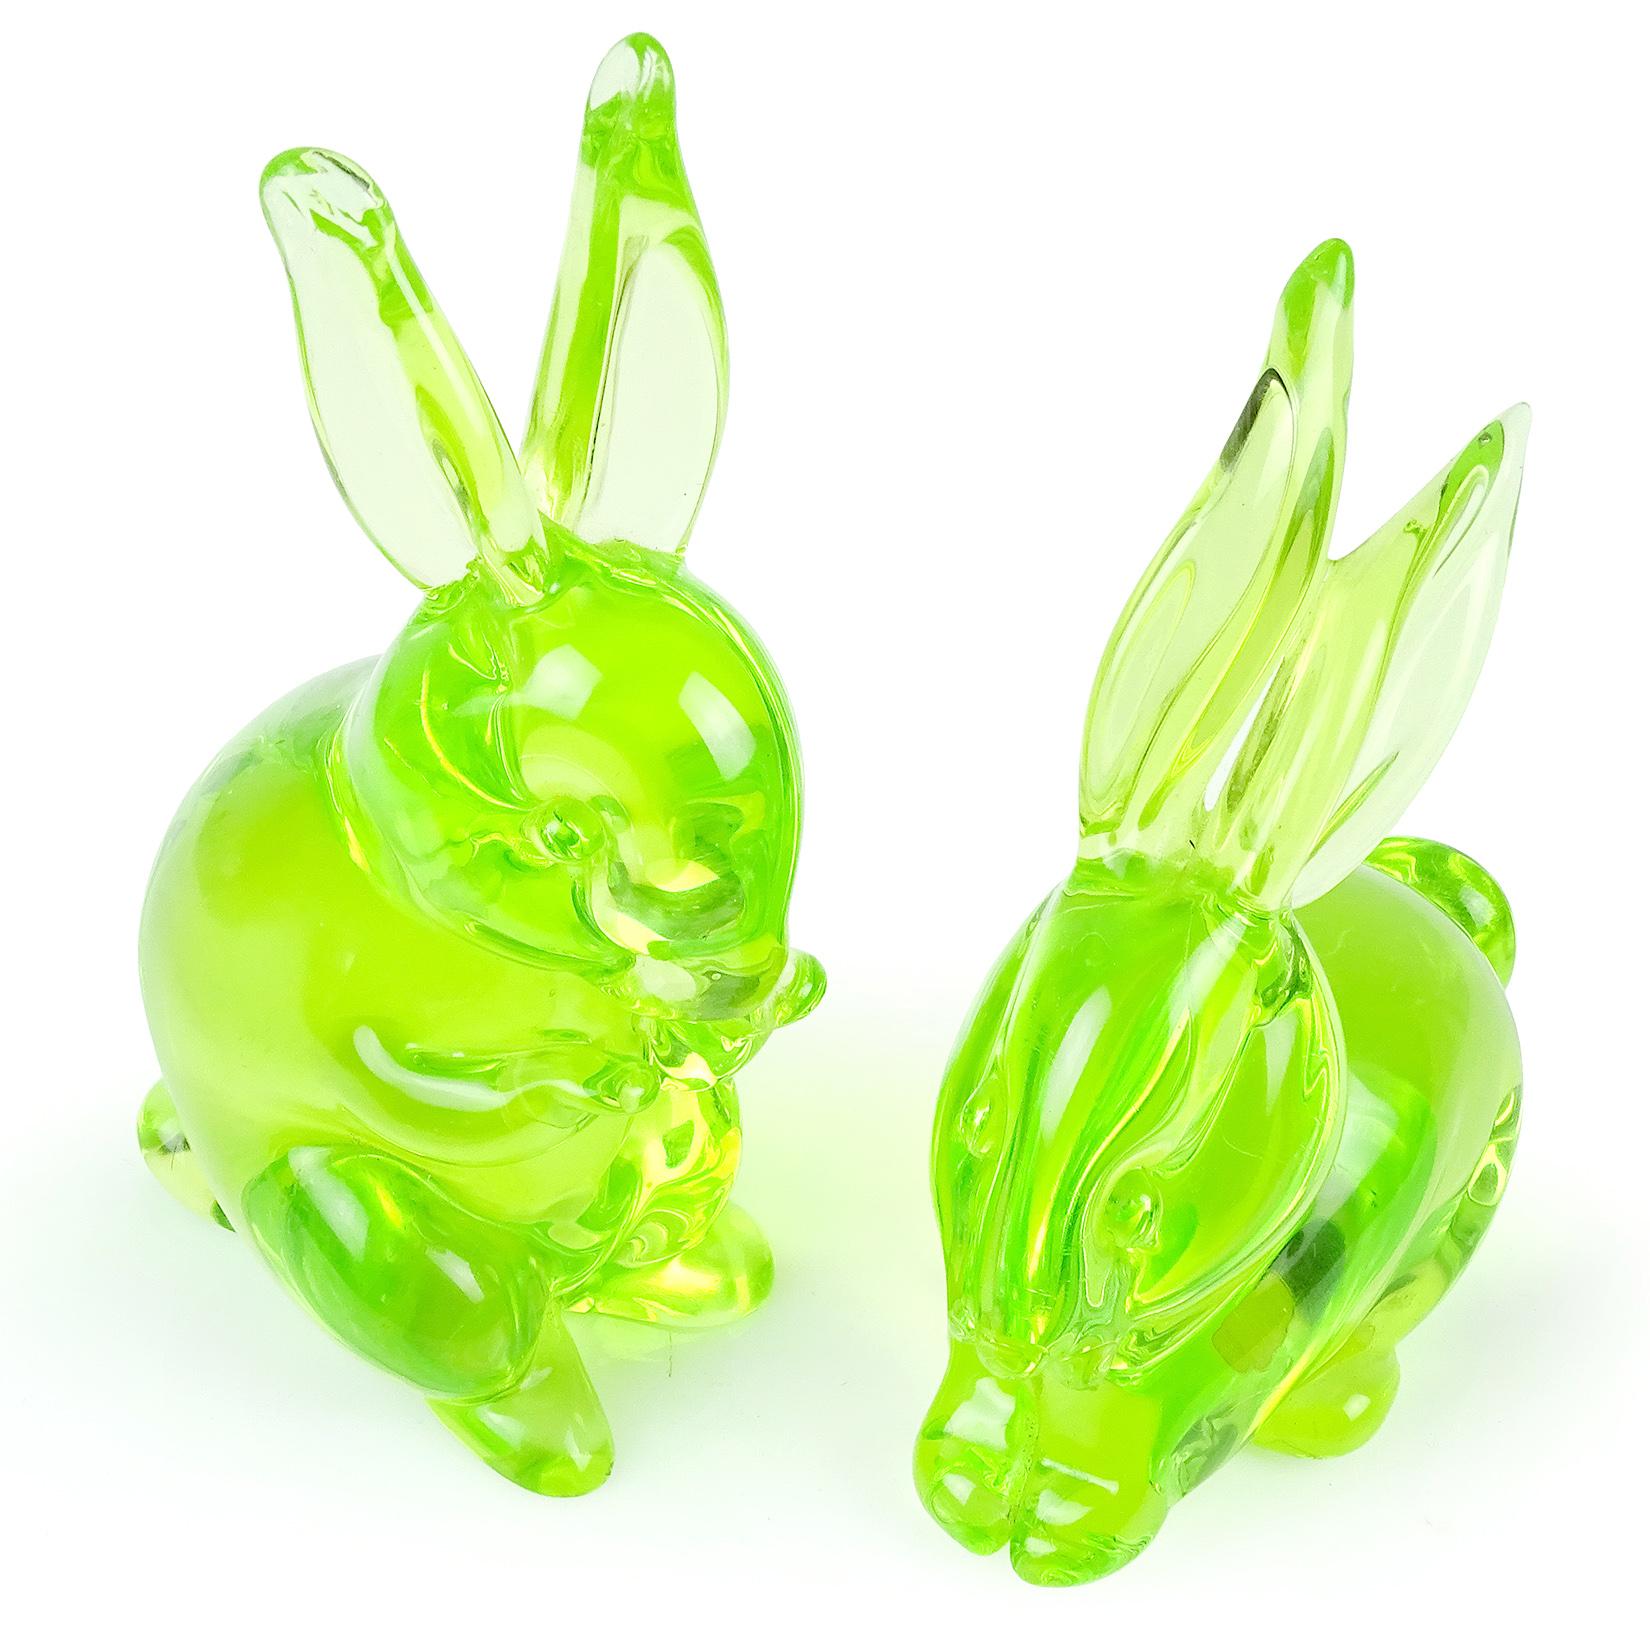 Beautiful and very cute set of Murano hand blown bright green Italian art glass bunny rabbit sculptures or figurines. Documented to designer Archimede Seguso. One still retains the original 